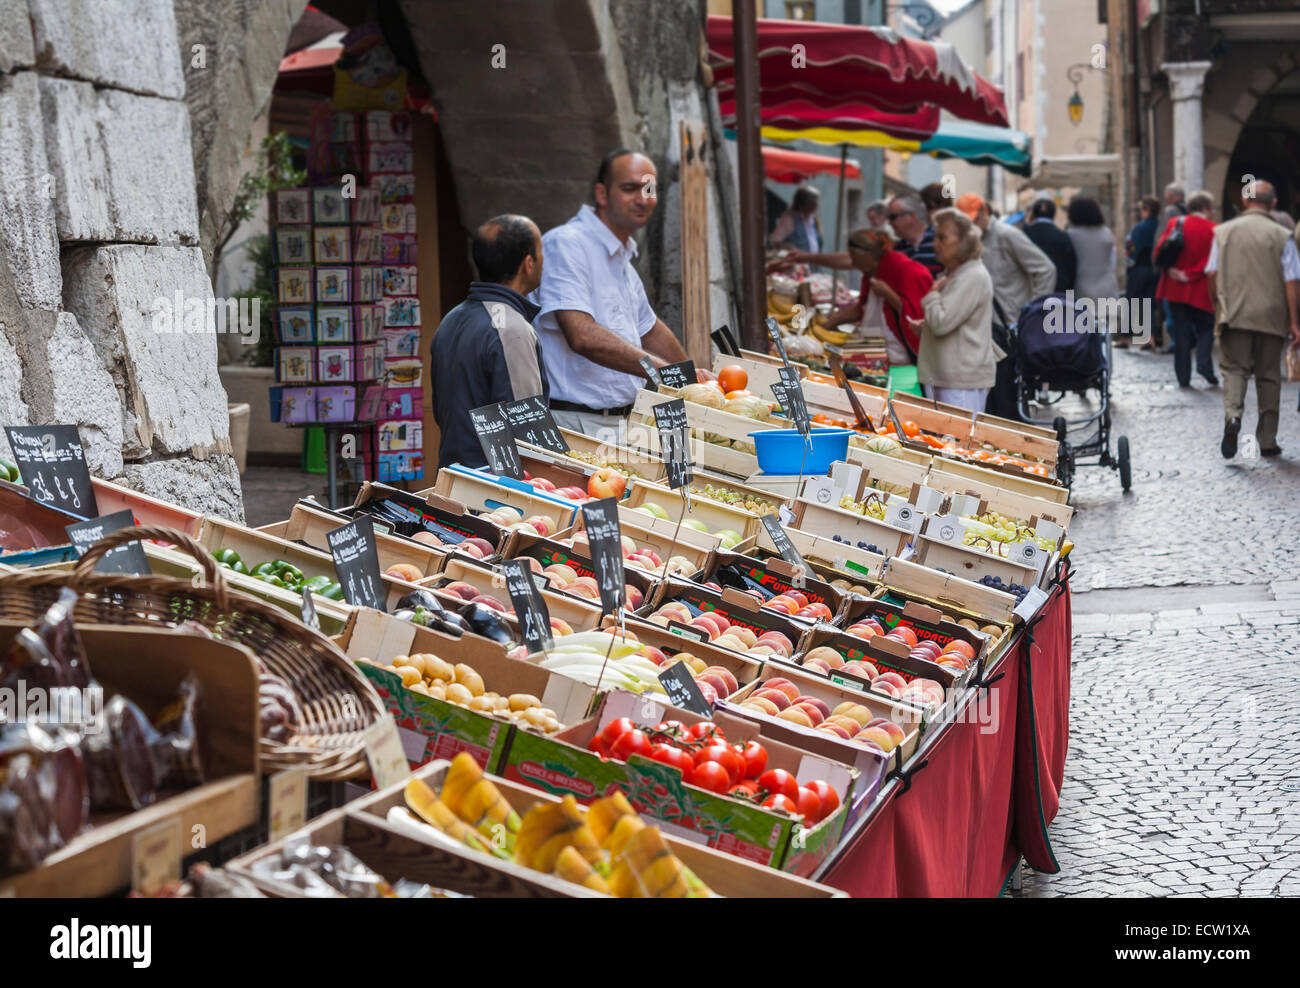 Local lifestyle: Fruit, vegetable and produce stalls and stallholders at the popular local outdoor food market in the old town, Annecy, France Stock Photo